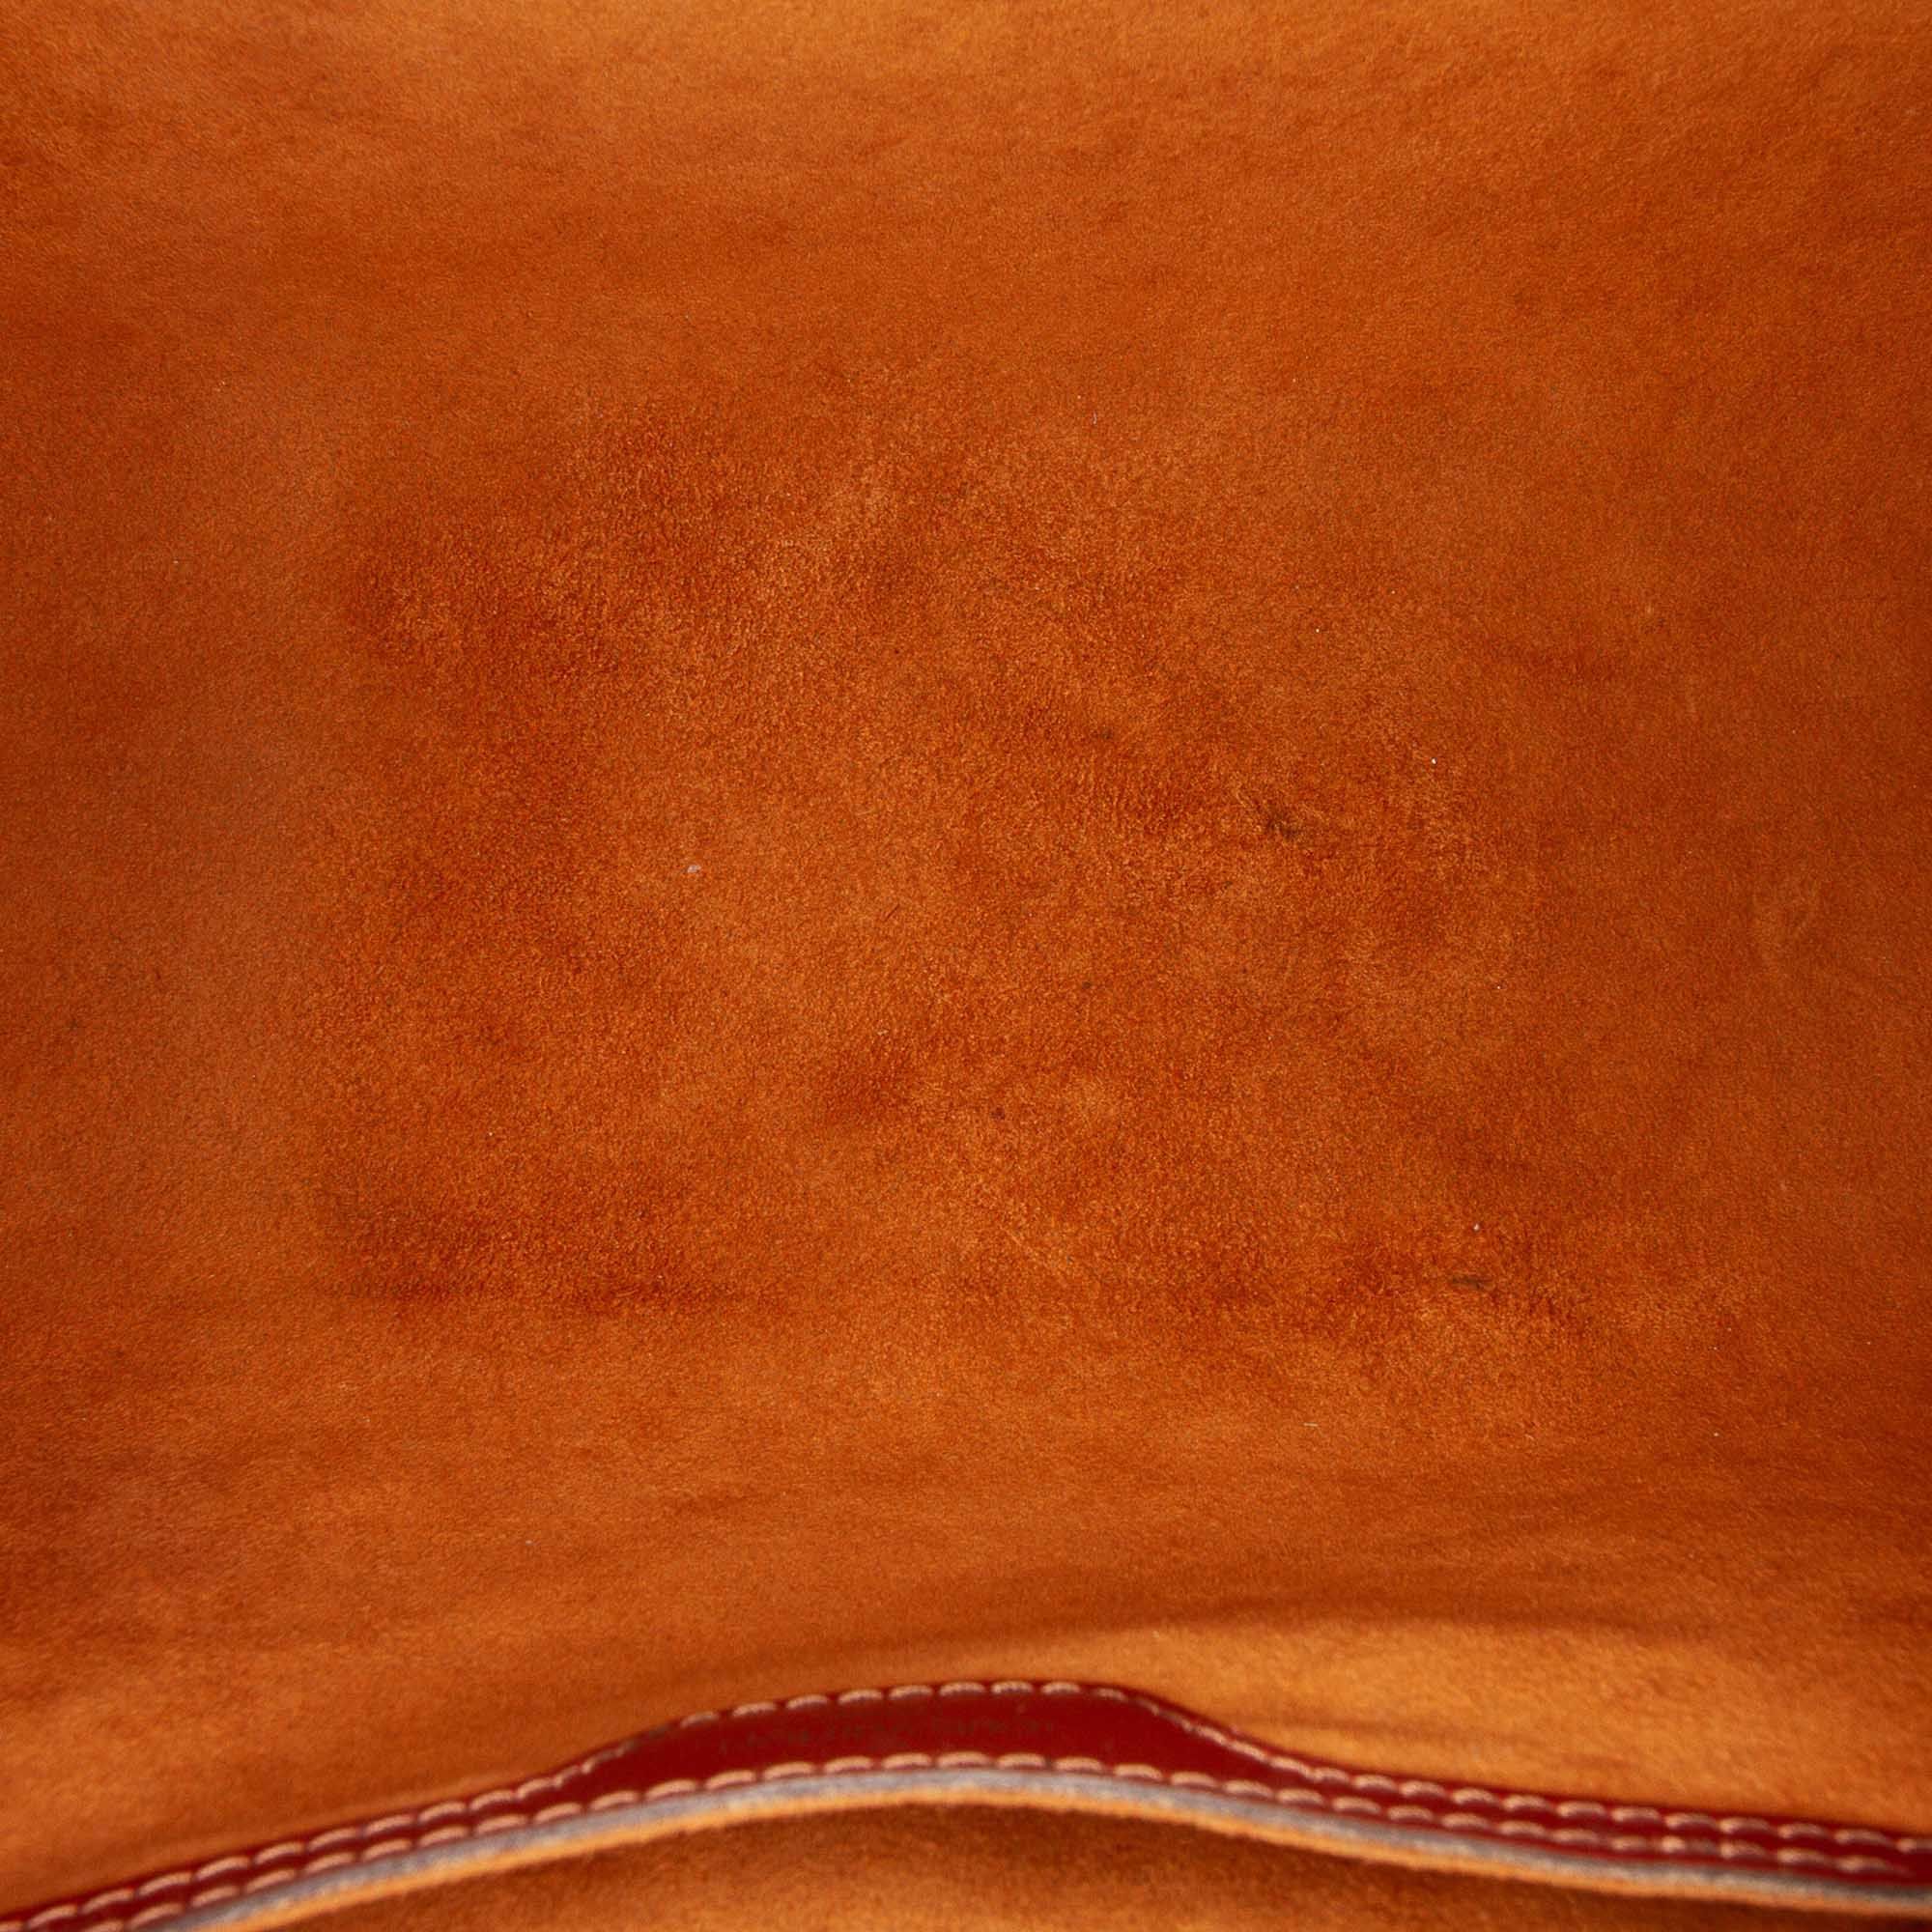 VINTAGE. RRP AS NEW. The Soufflot features an epi leather body, flat shoulder straps, a top zip closure, and an interior slip pocket.Exterior back is discolored and scratched. Exterior bottom is discolored, scratched and worn. Exterior corners is cracked, discolored and peeling. Exterior front is discolored and scratched. Exterior handle is cracked, discolored, peeling, scratched and stained. Exterior side is cracked, discolored, peeling and scratched. Screw is scratched and tarnished. Zipper is scratched and tarnished. Interior lining is stained also  has smell of musty. Interior pocket has smell of musty.

Dimensions:
Length 16cm
Width 31cm
Depth 15cm
Hand Drop 16cm
Shoulder Drop 15cm

Original Accessories: This item has no other original accessories.

Serial Number: AR0977
Color: Brown
Material: Leather x Epi Leather
Country of Origin: FRANCE
Boutique Reference: SSU165304K1342


Product Rating: FairCondition

Certificate of Authenticity is available upon request with no extra fee required. Please contact our customer service team.